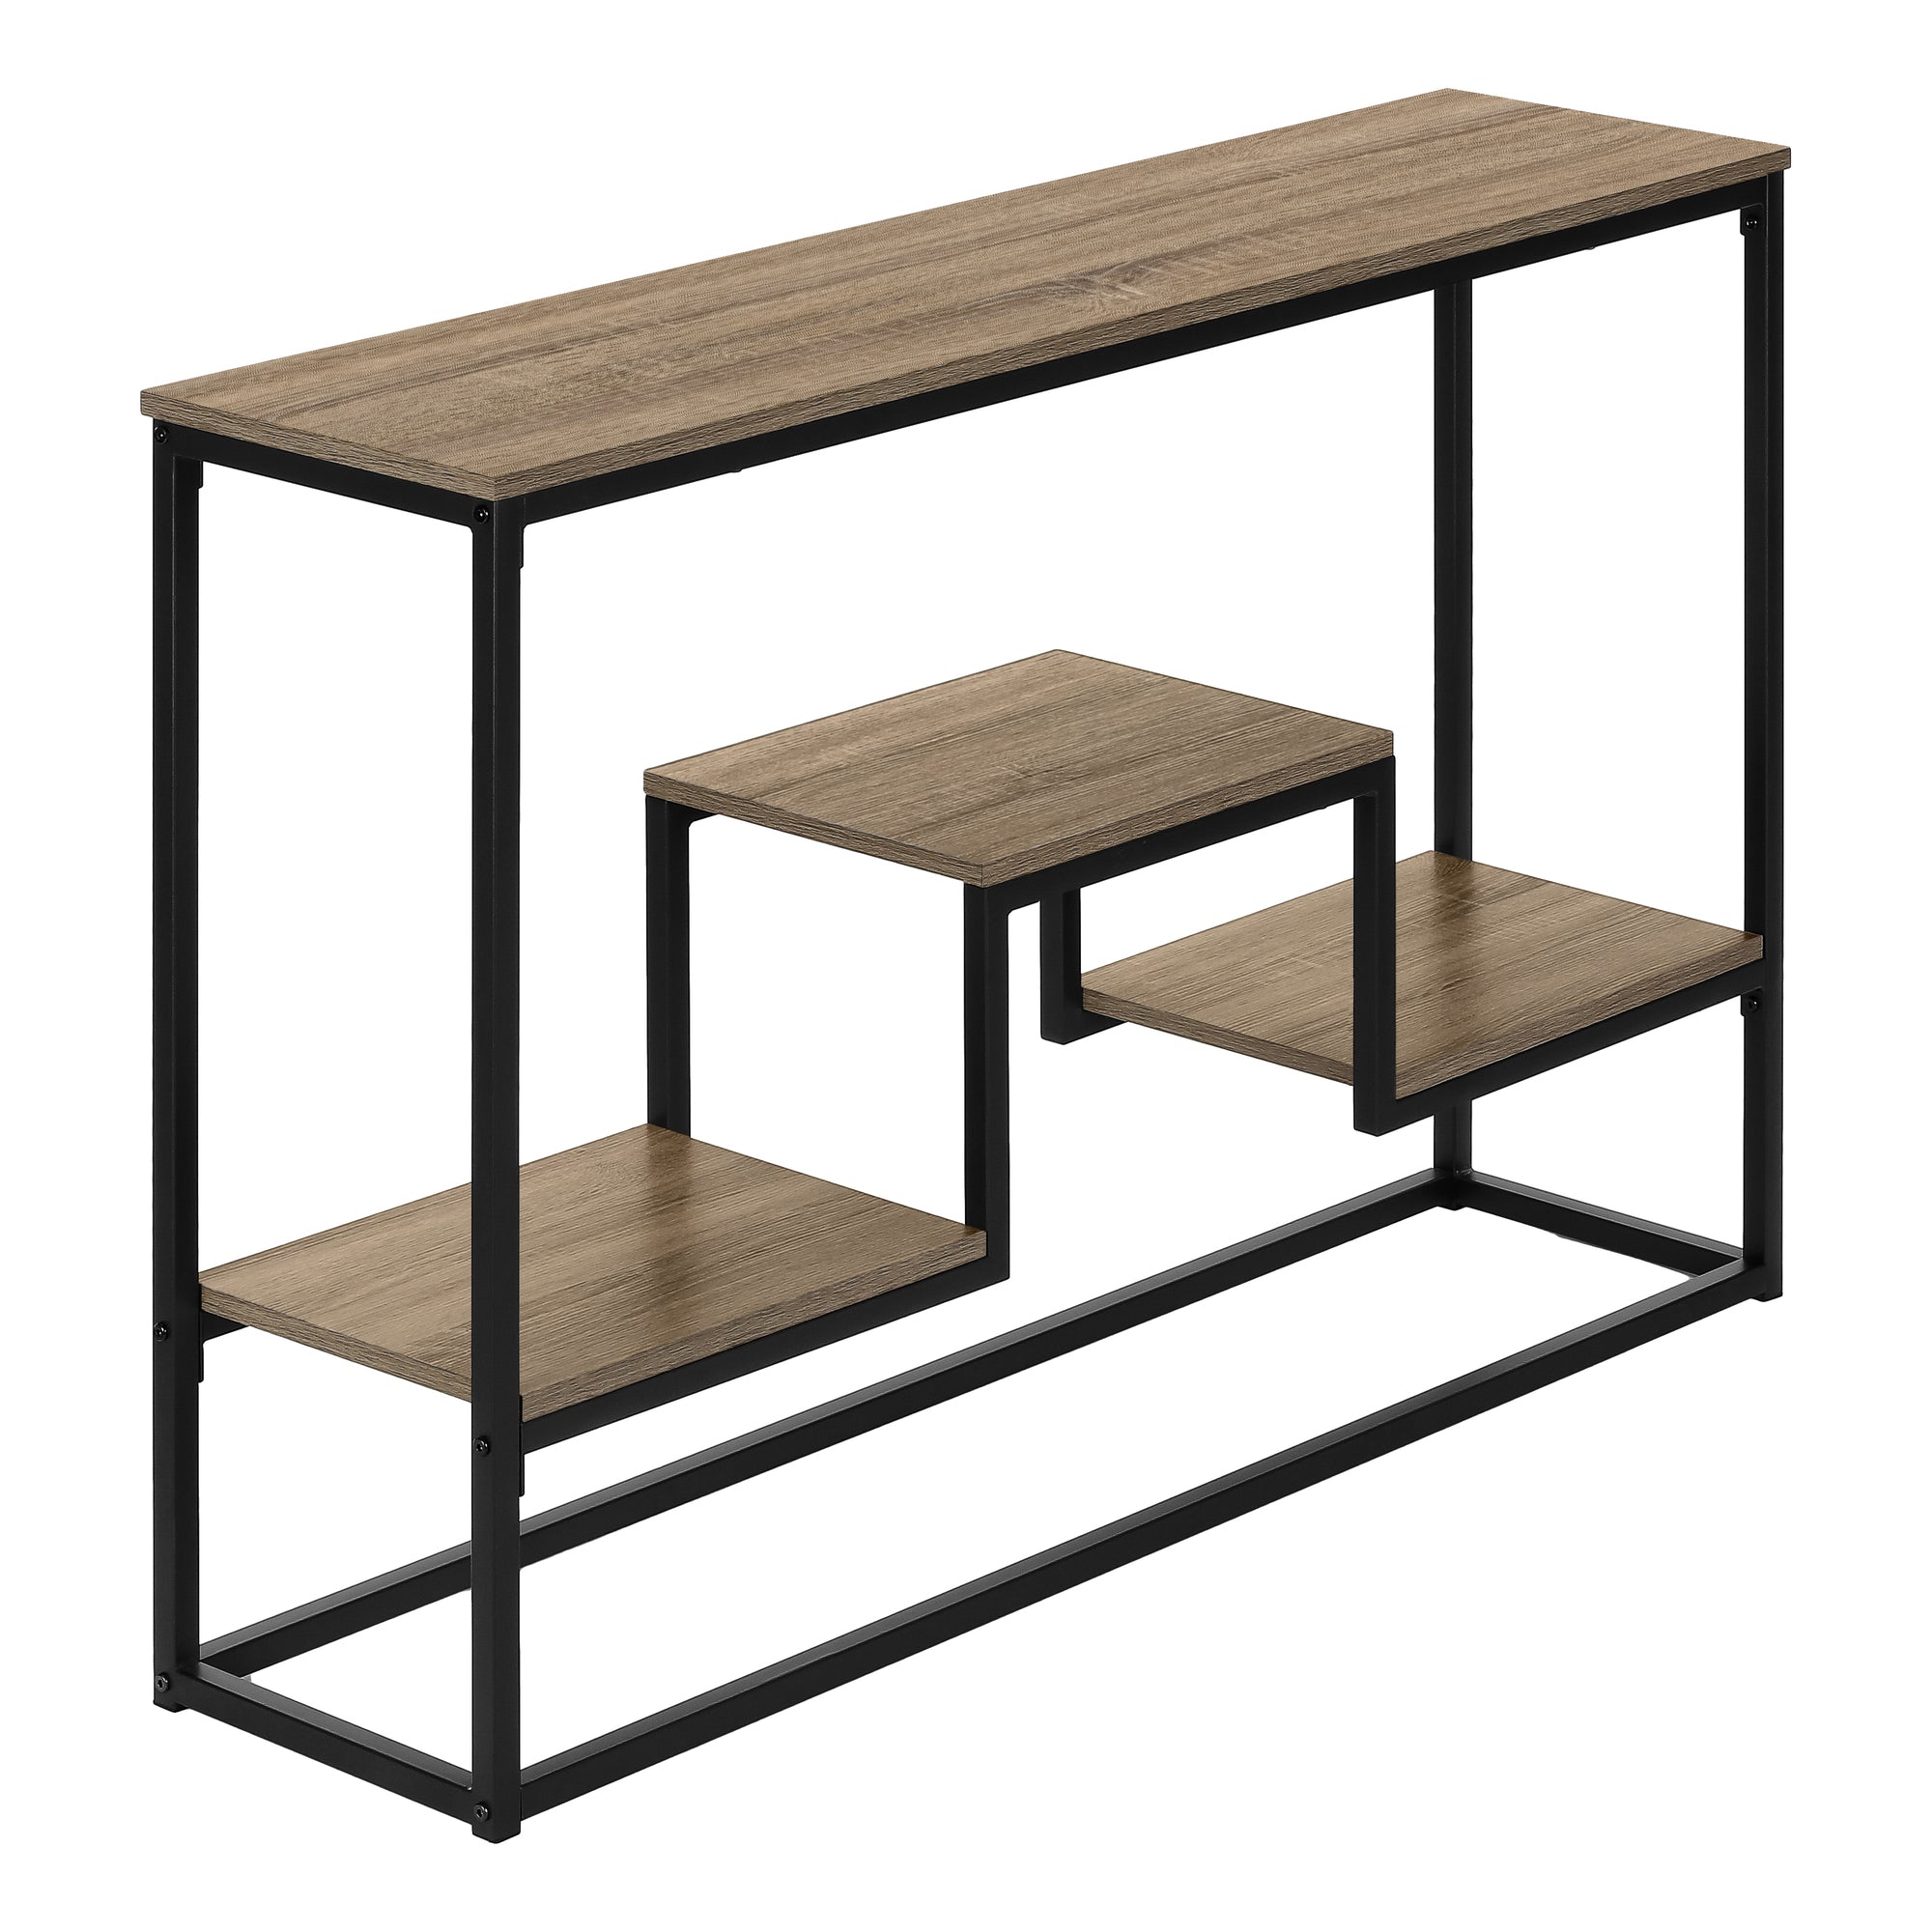 Accent Table - 48L / Taupe / Black Metal Hall Console